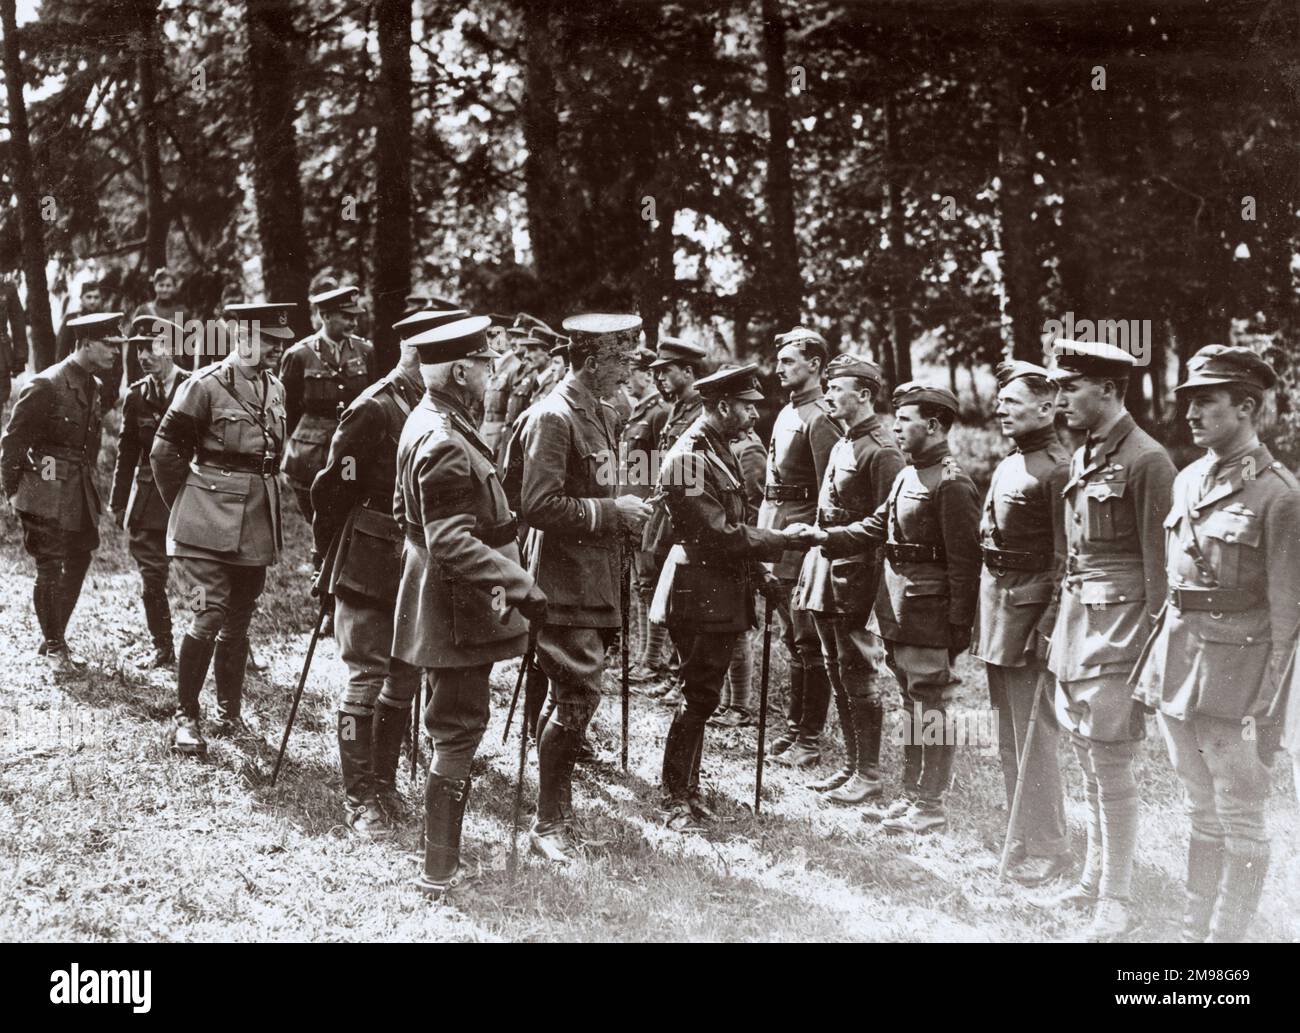 King George V inspecting RAF pilots on the Western Front in France during World War One, August 1918. General Herbert Plumer (nicknamed Old Plum) can be seen on the left. The men belonged to 53 Squadron, which included Harold Auerbach. Stock Photo